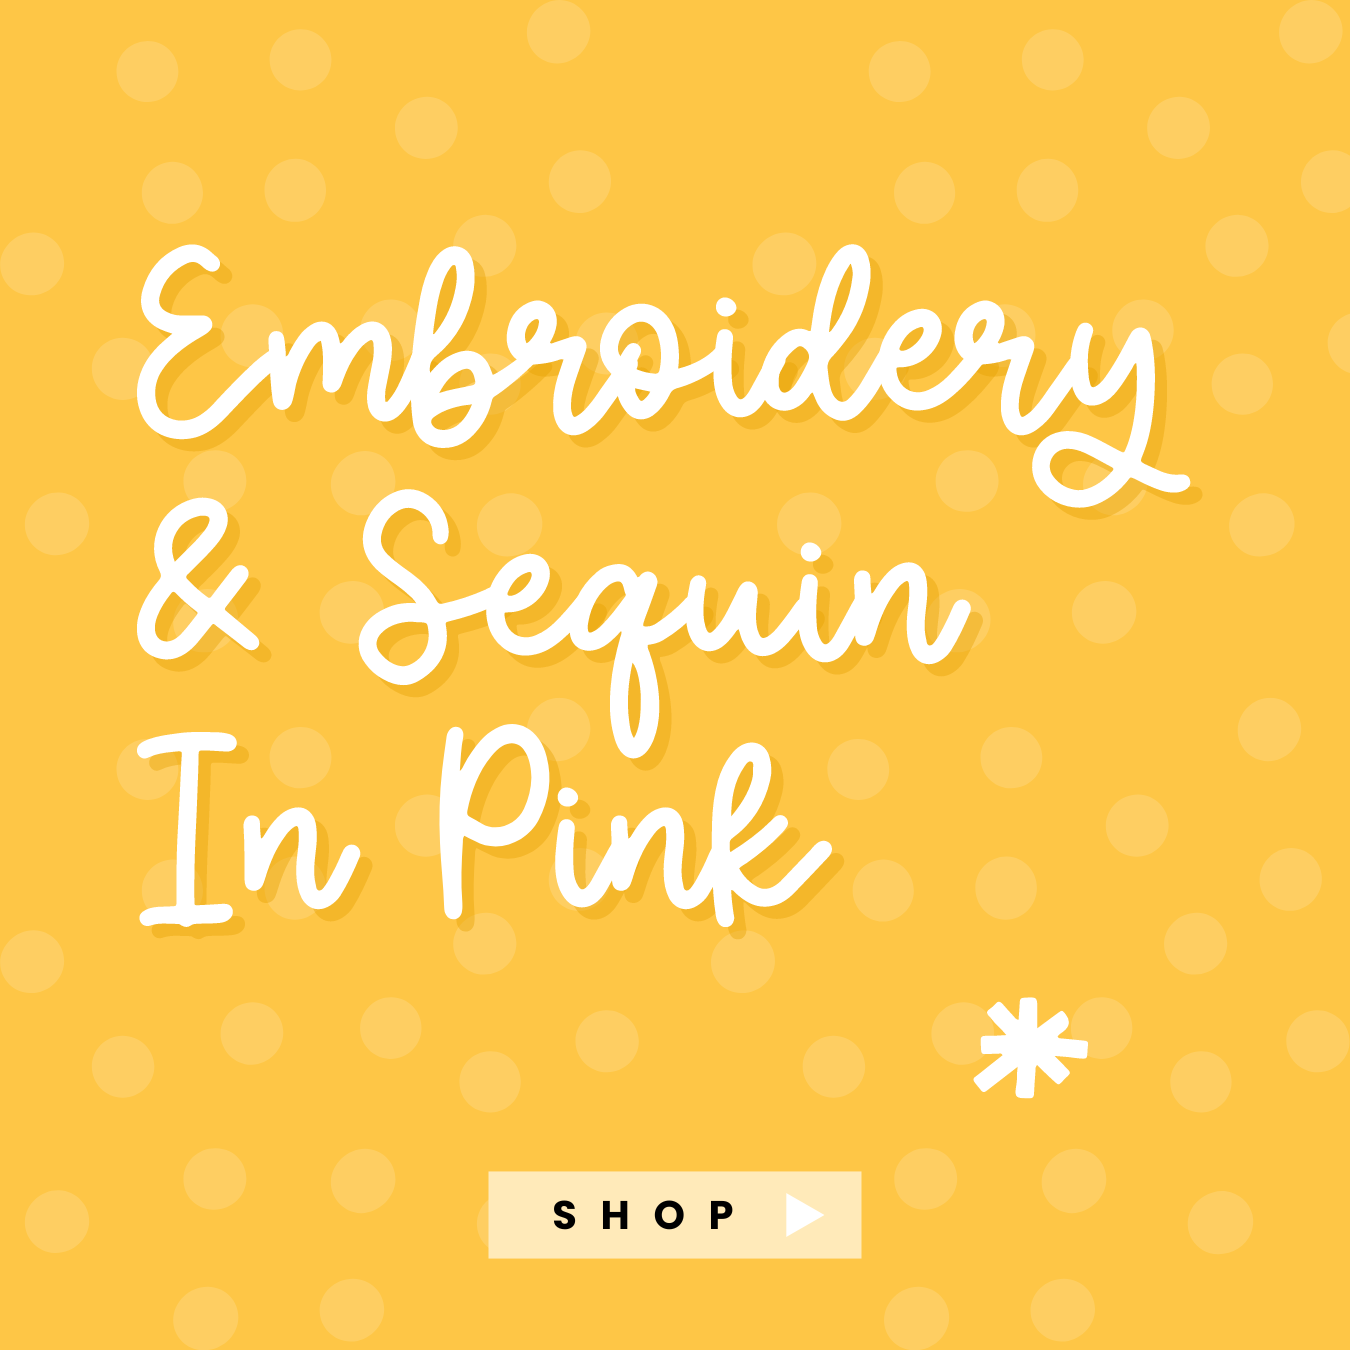 Embroidery & Sequin in Pink